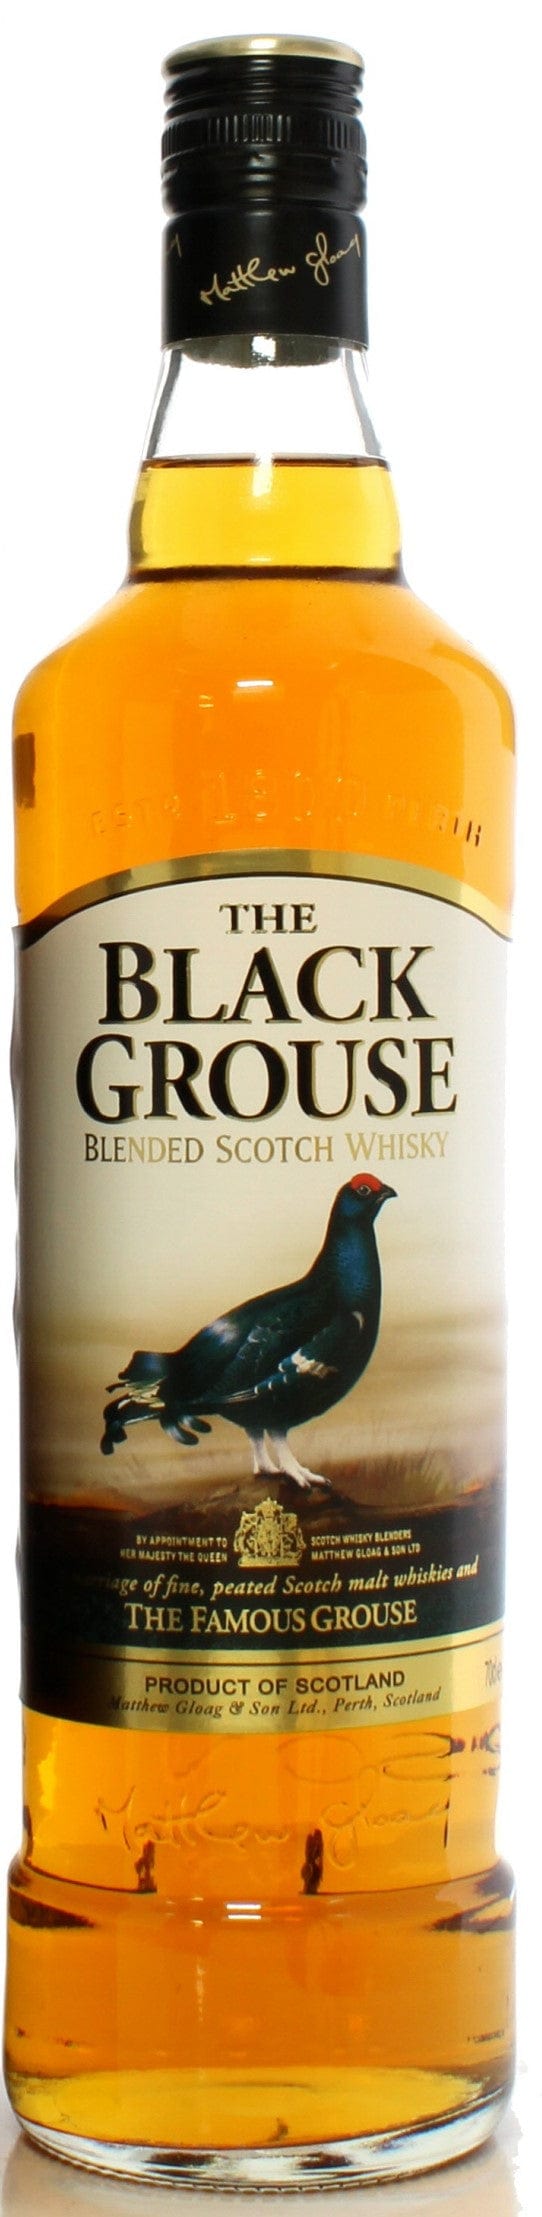 The Black Grouse Blended Scotch Whisky 70cl